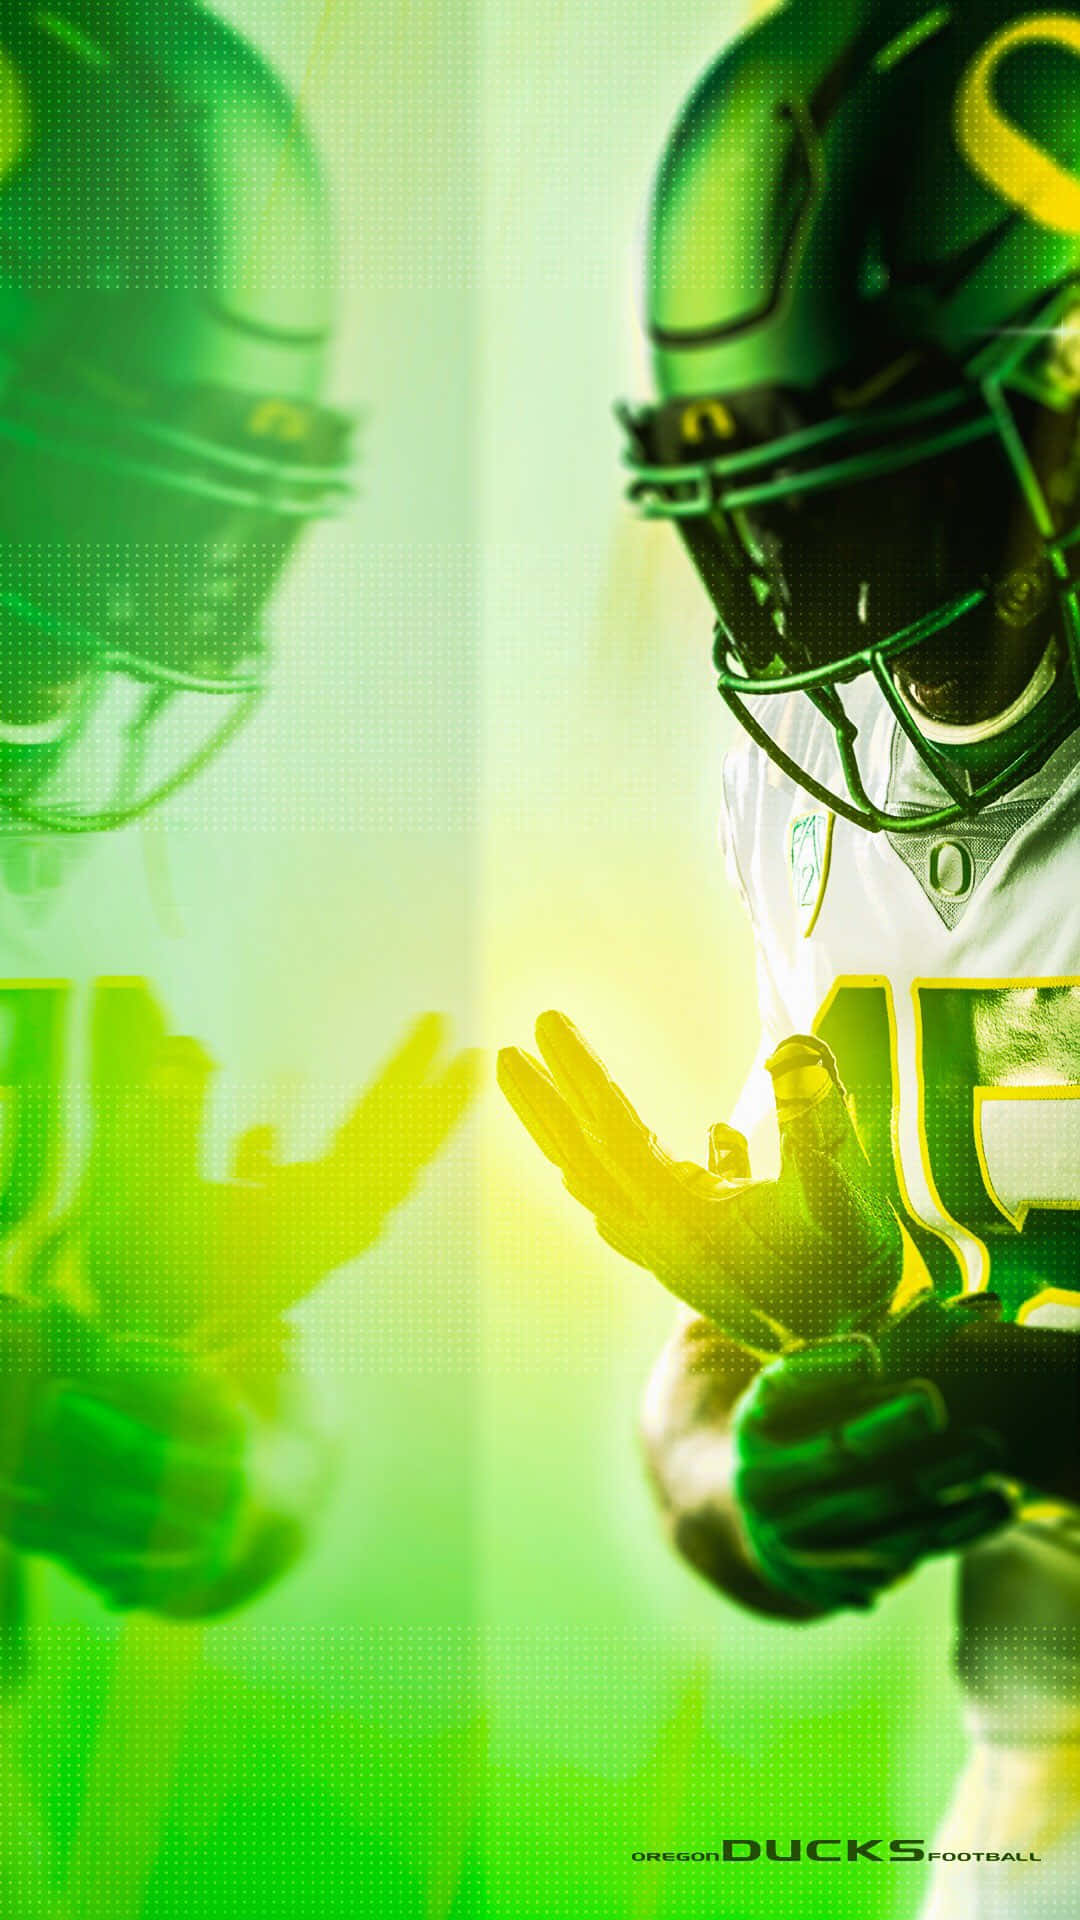 A Passionate Oregon Ducks Football Player In Action On The Field. Background